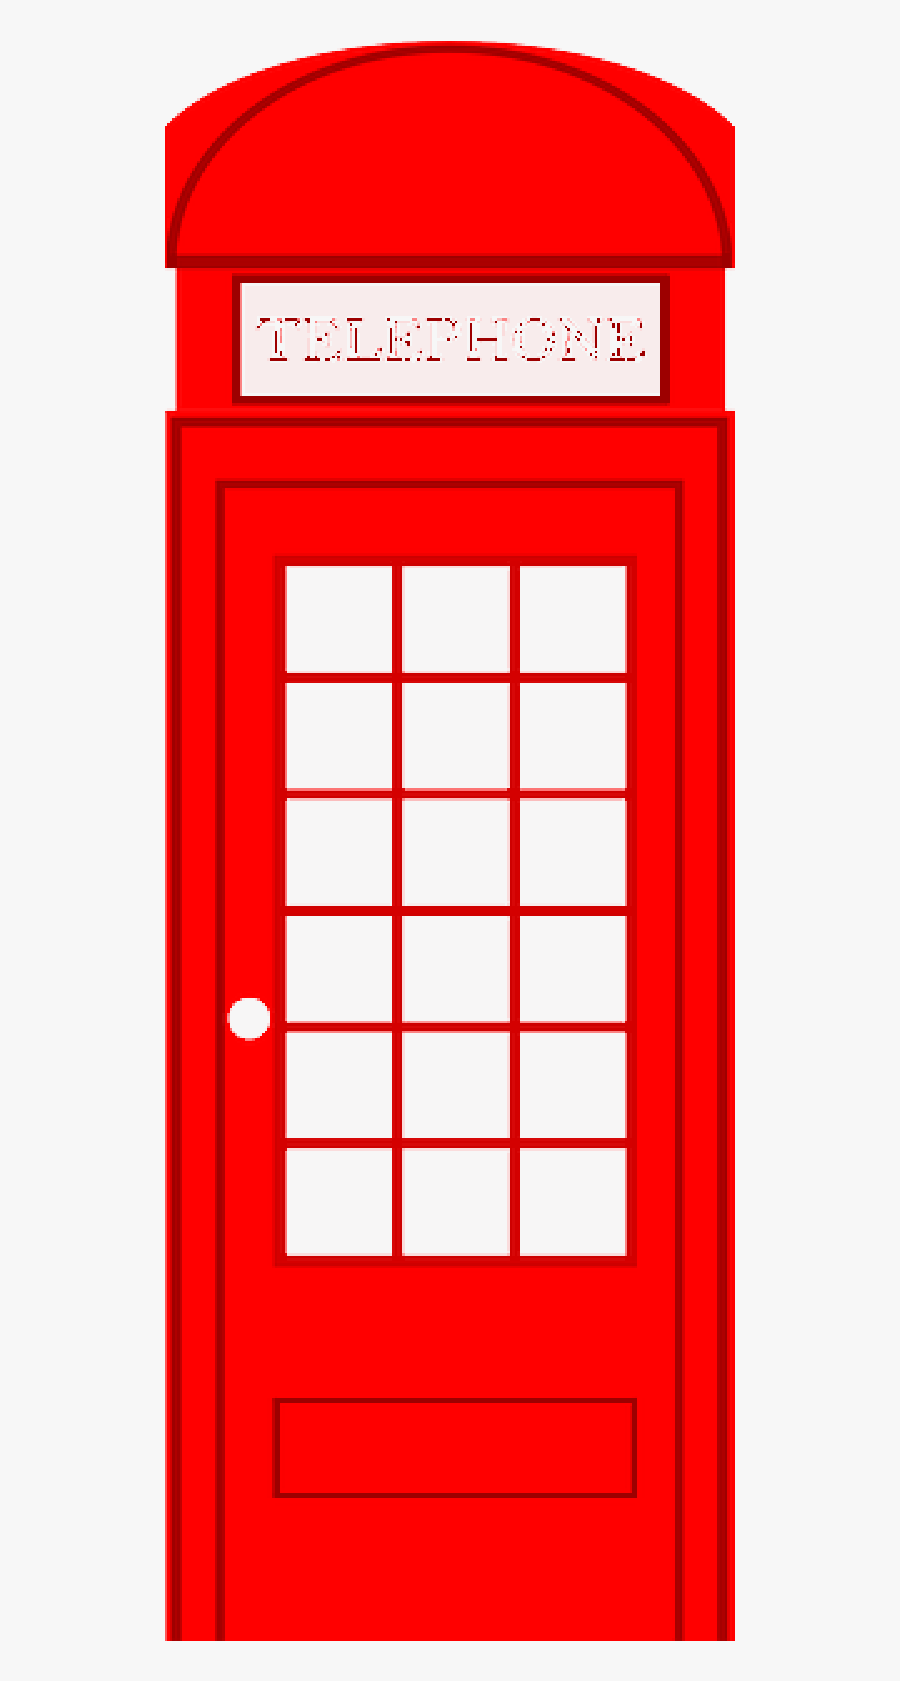 Call Booth Clipart - London Phone Booth Clipart, Transparent Clipart